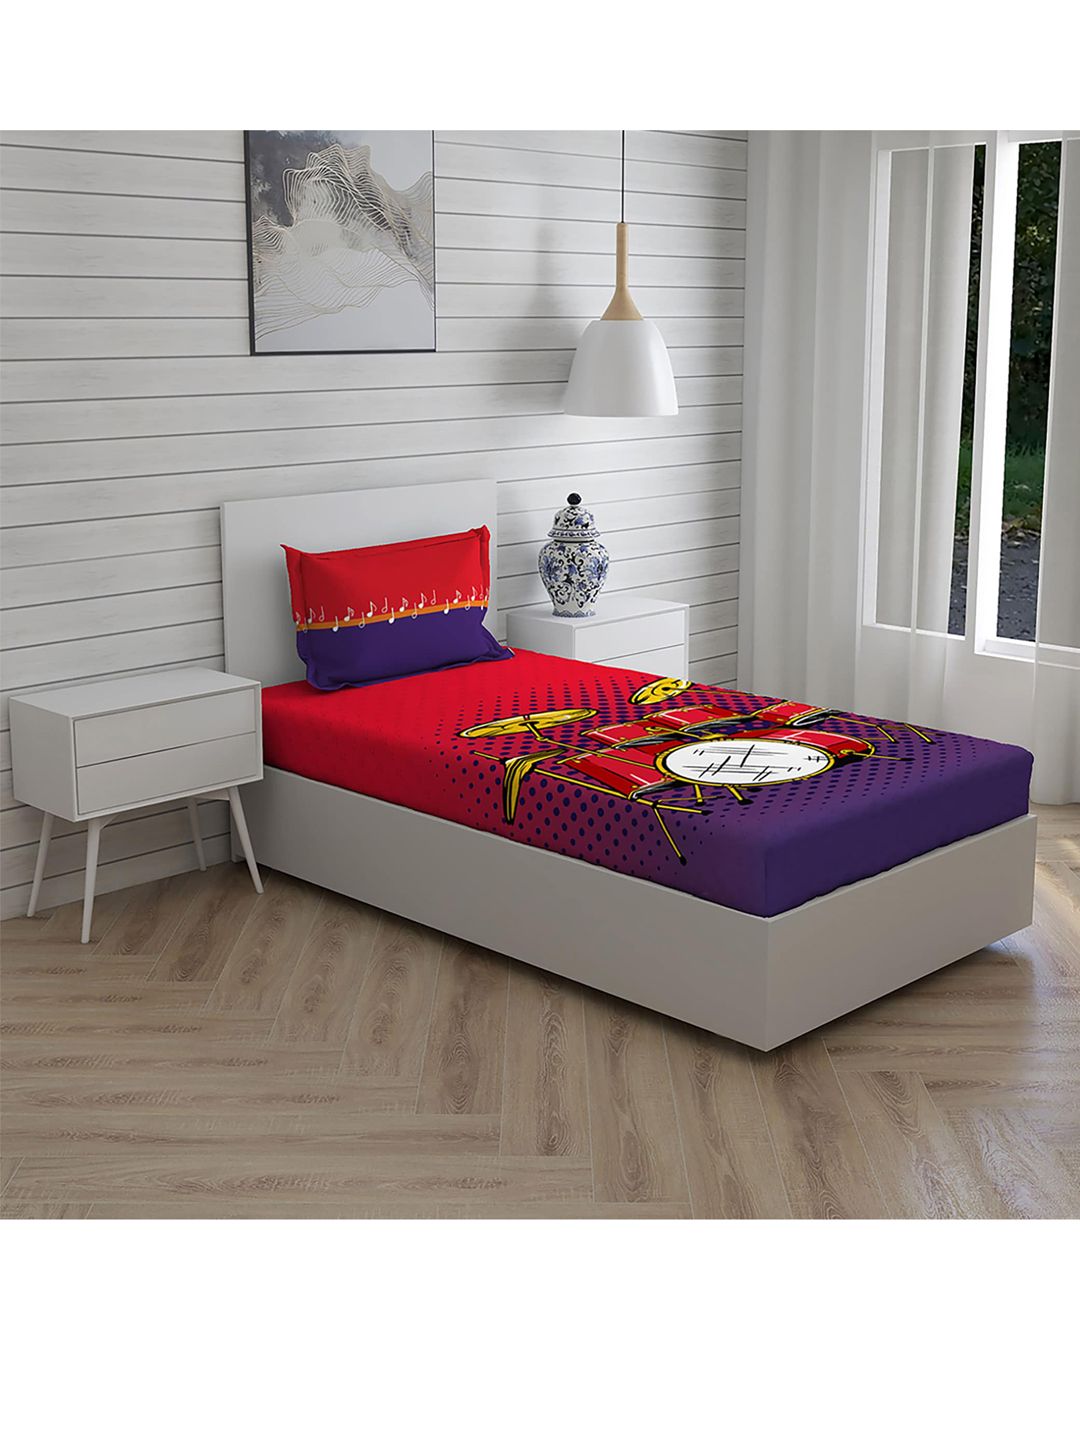 Boutique Living India Red Printed Pure Cotton Single Bedding Set Price in India